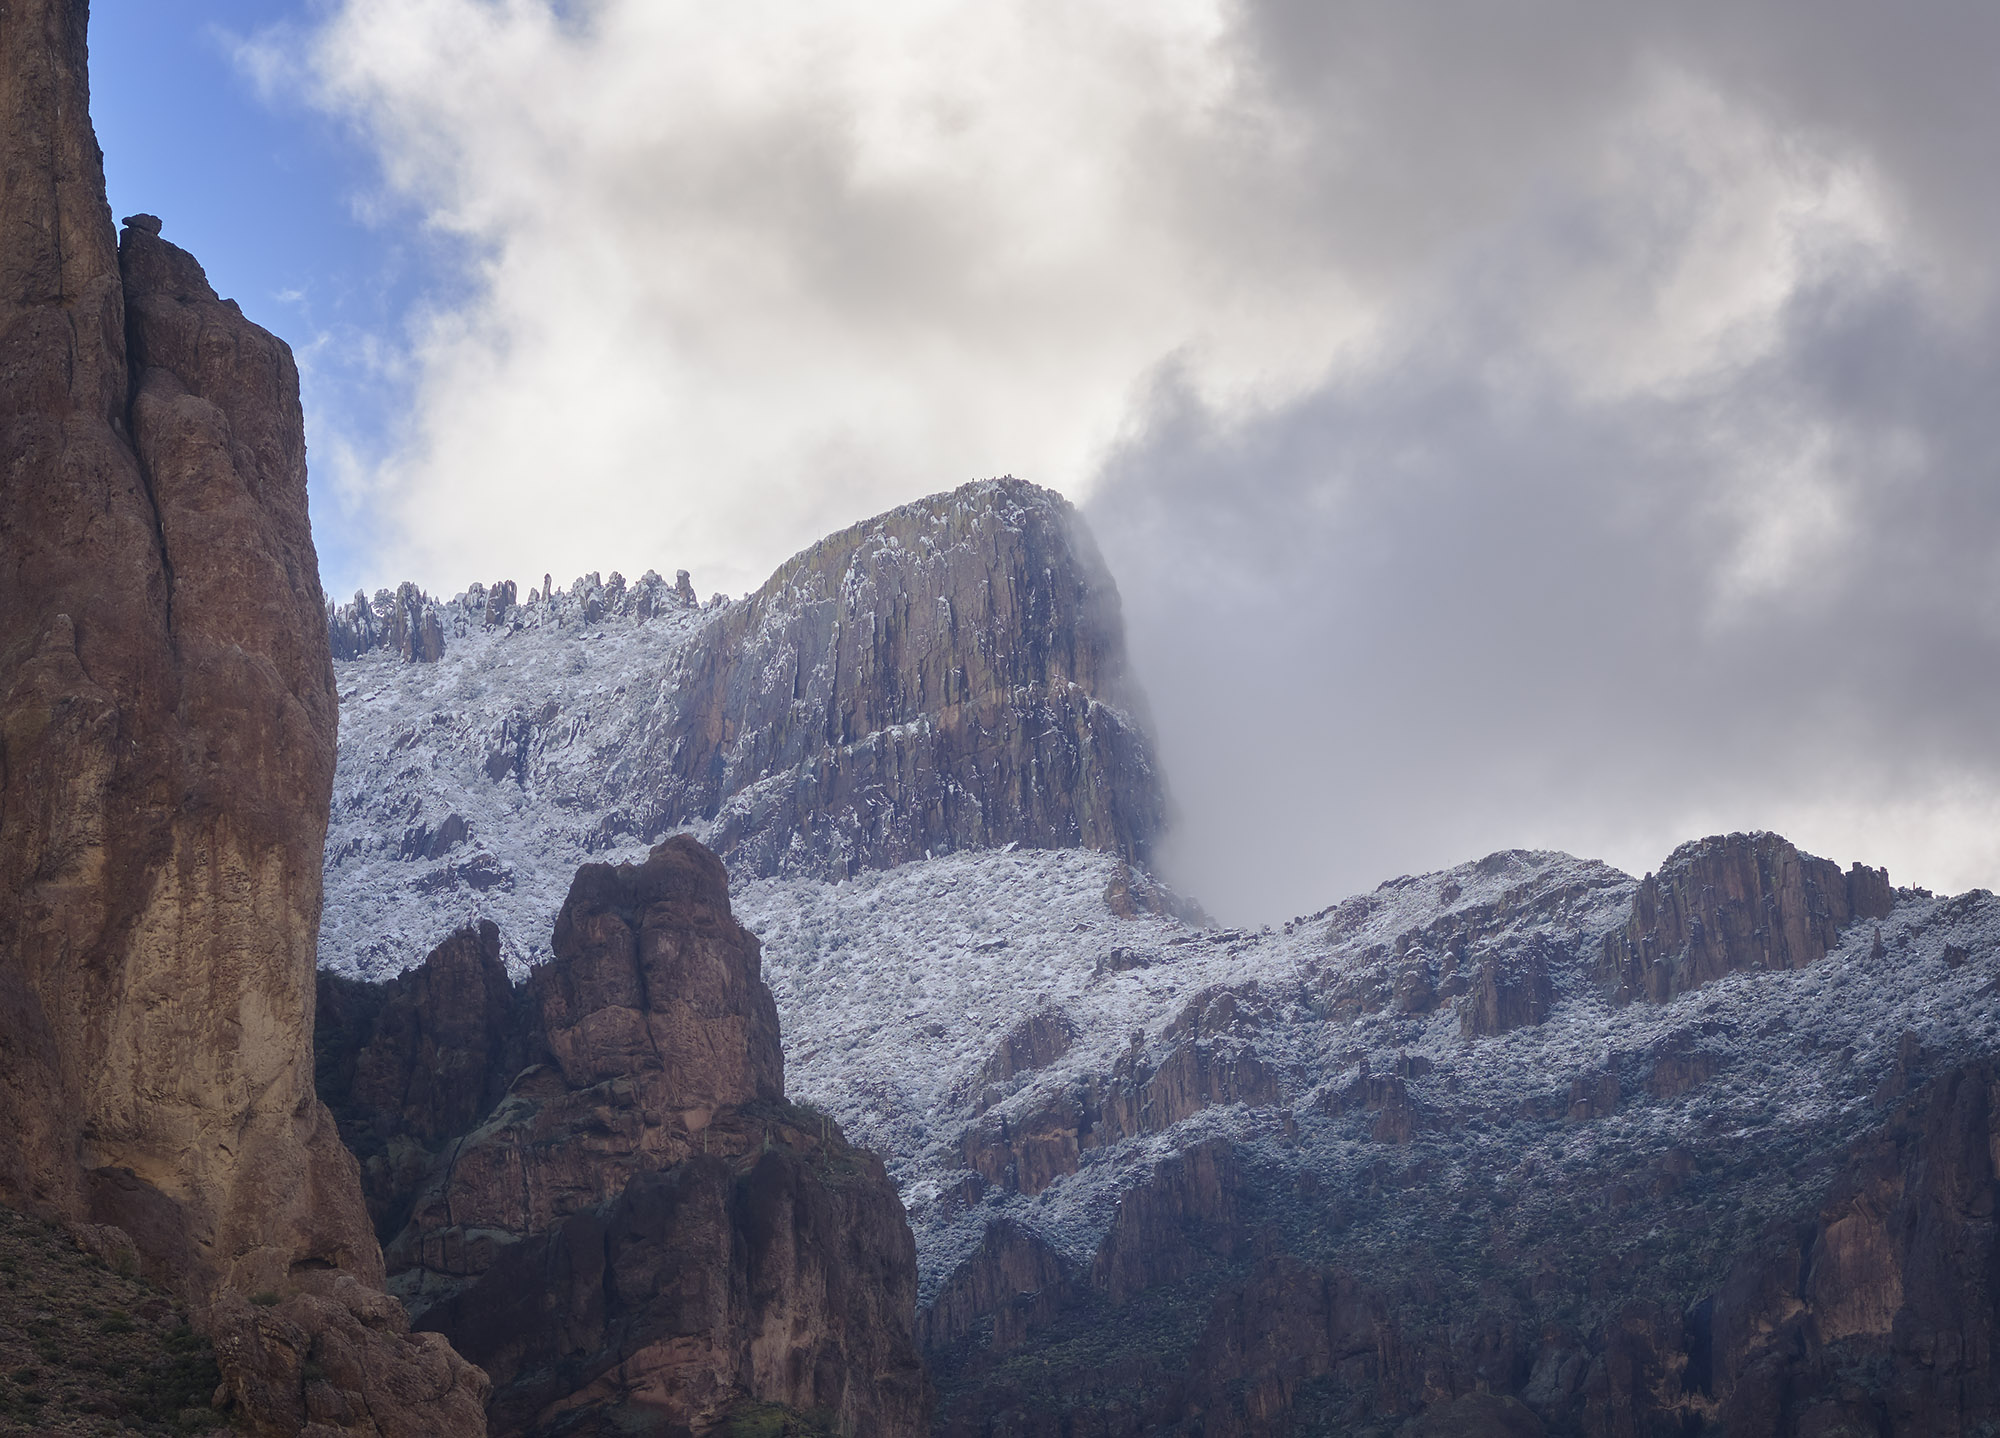 Landscape photo of Superstition Mountain in Arizona covered in snow, arizona landscape photography